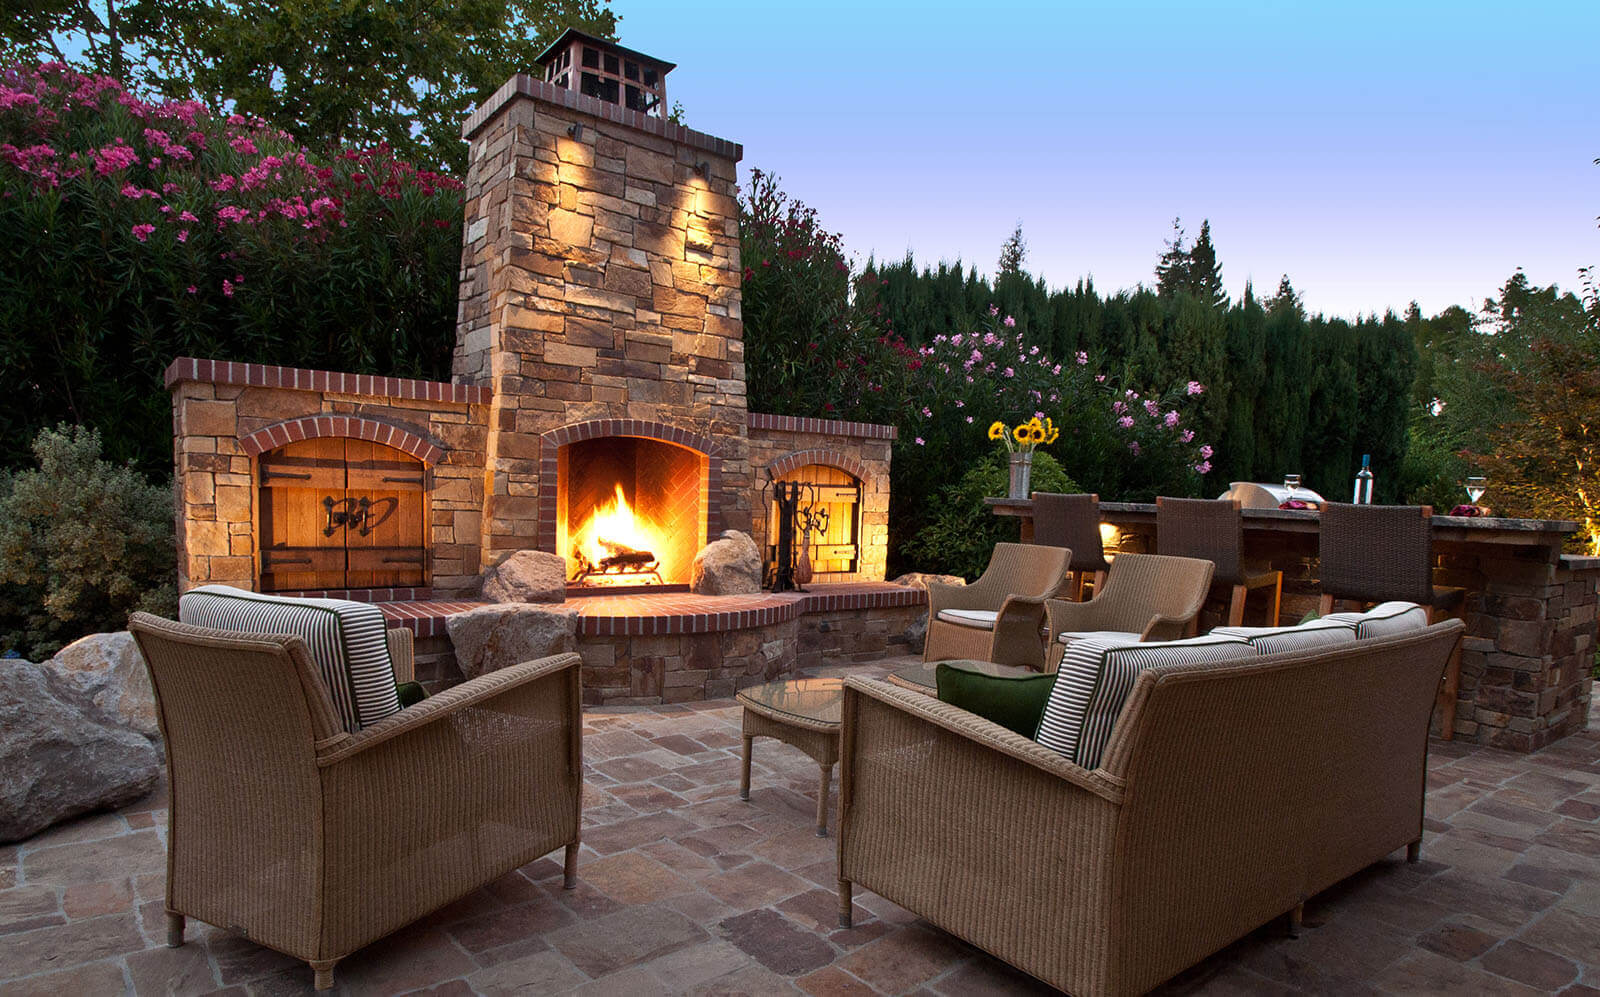 Stone and brick fireplace with rustic wooden details on a stone patio with outdoor lounges